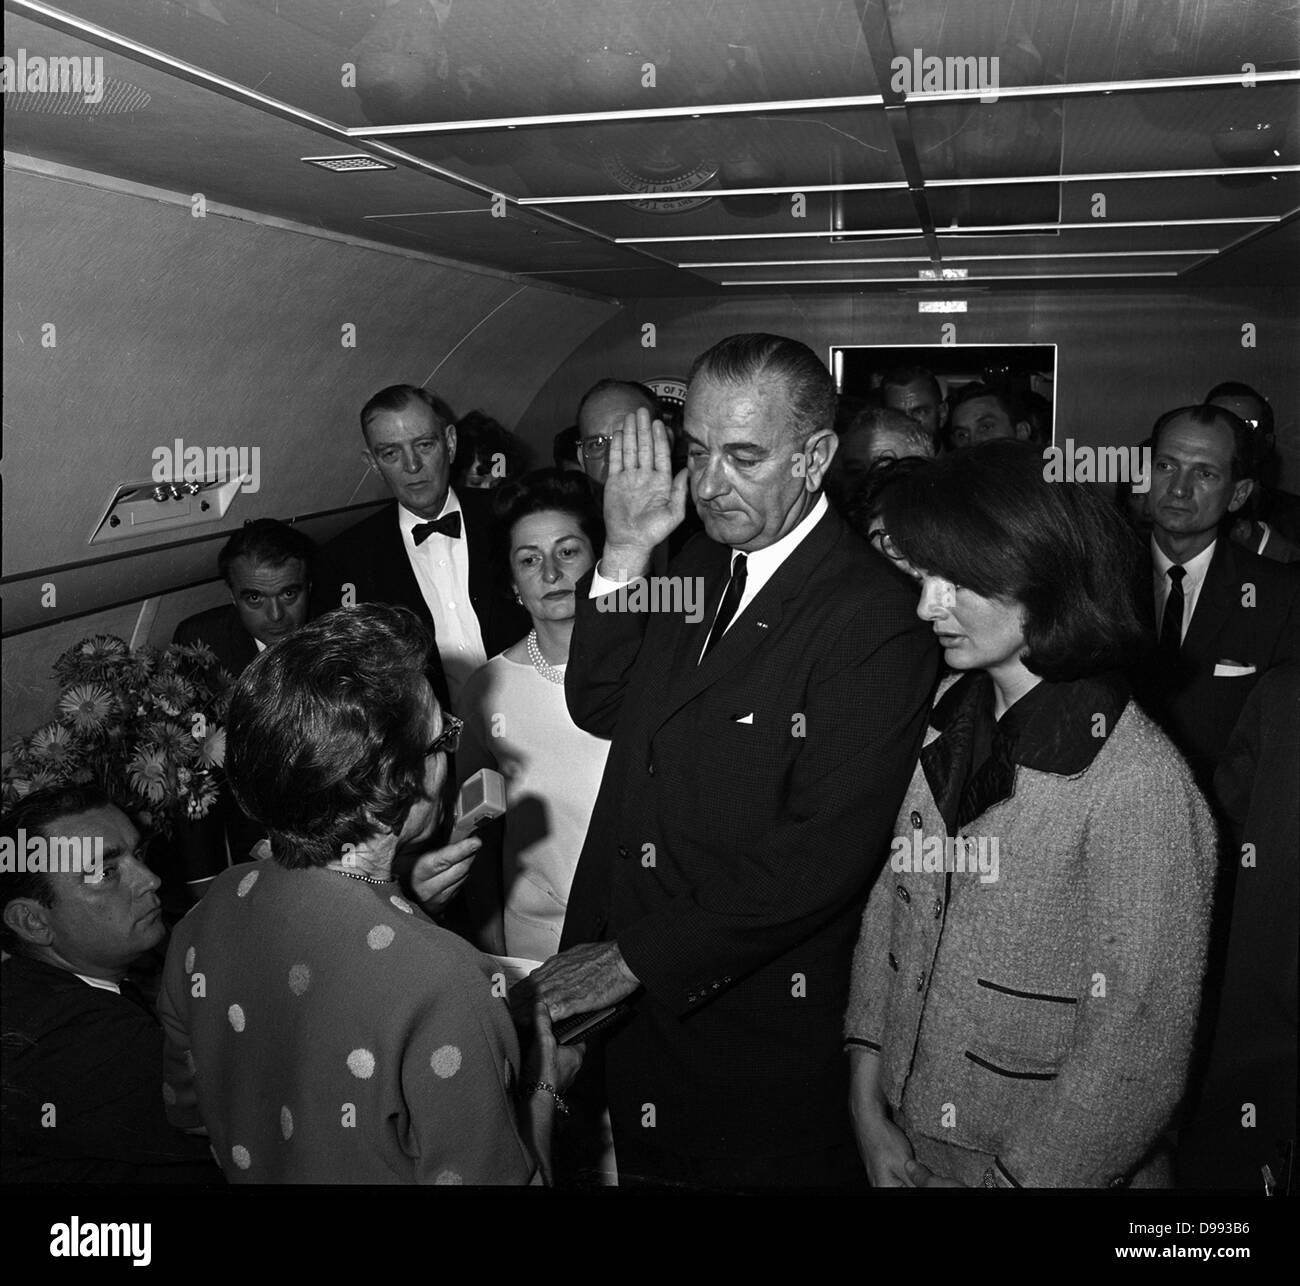 Lyndon Baines Johnson (August 27, 1908 – January 22, 1973), 36th President of the United States from 1963 to 1969 sworn in as President of the United States on an aircraft carrying the body of his assassinated predecessor John Kennedy. November 1963. He is Stock Photo